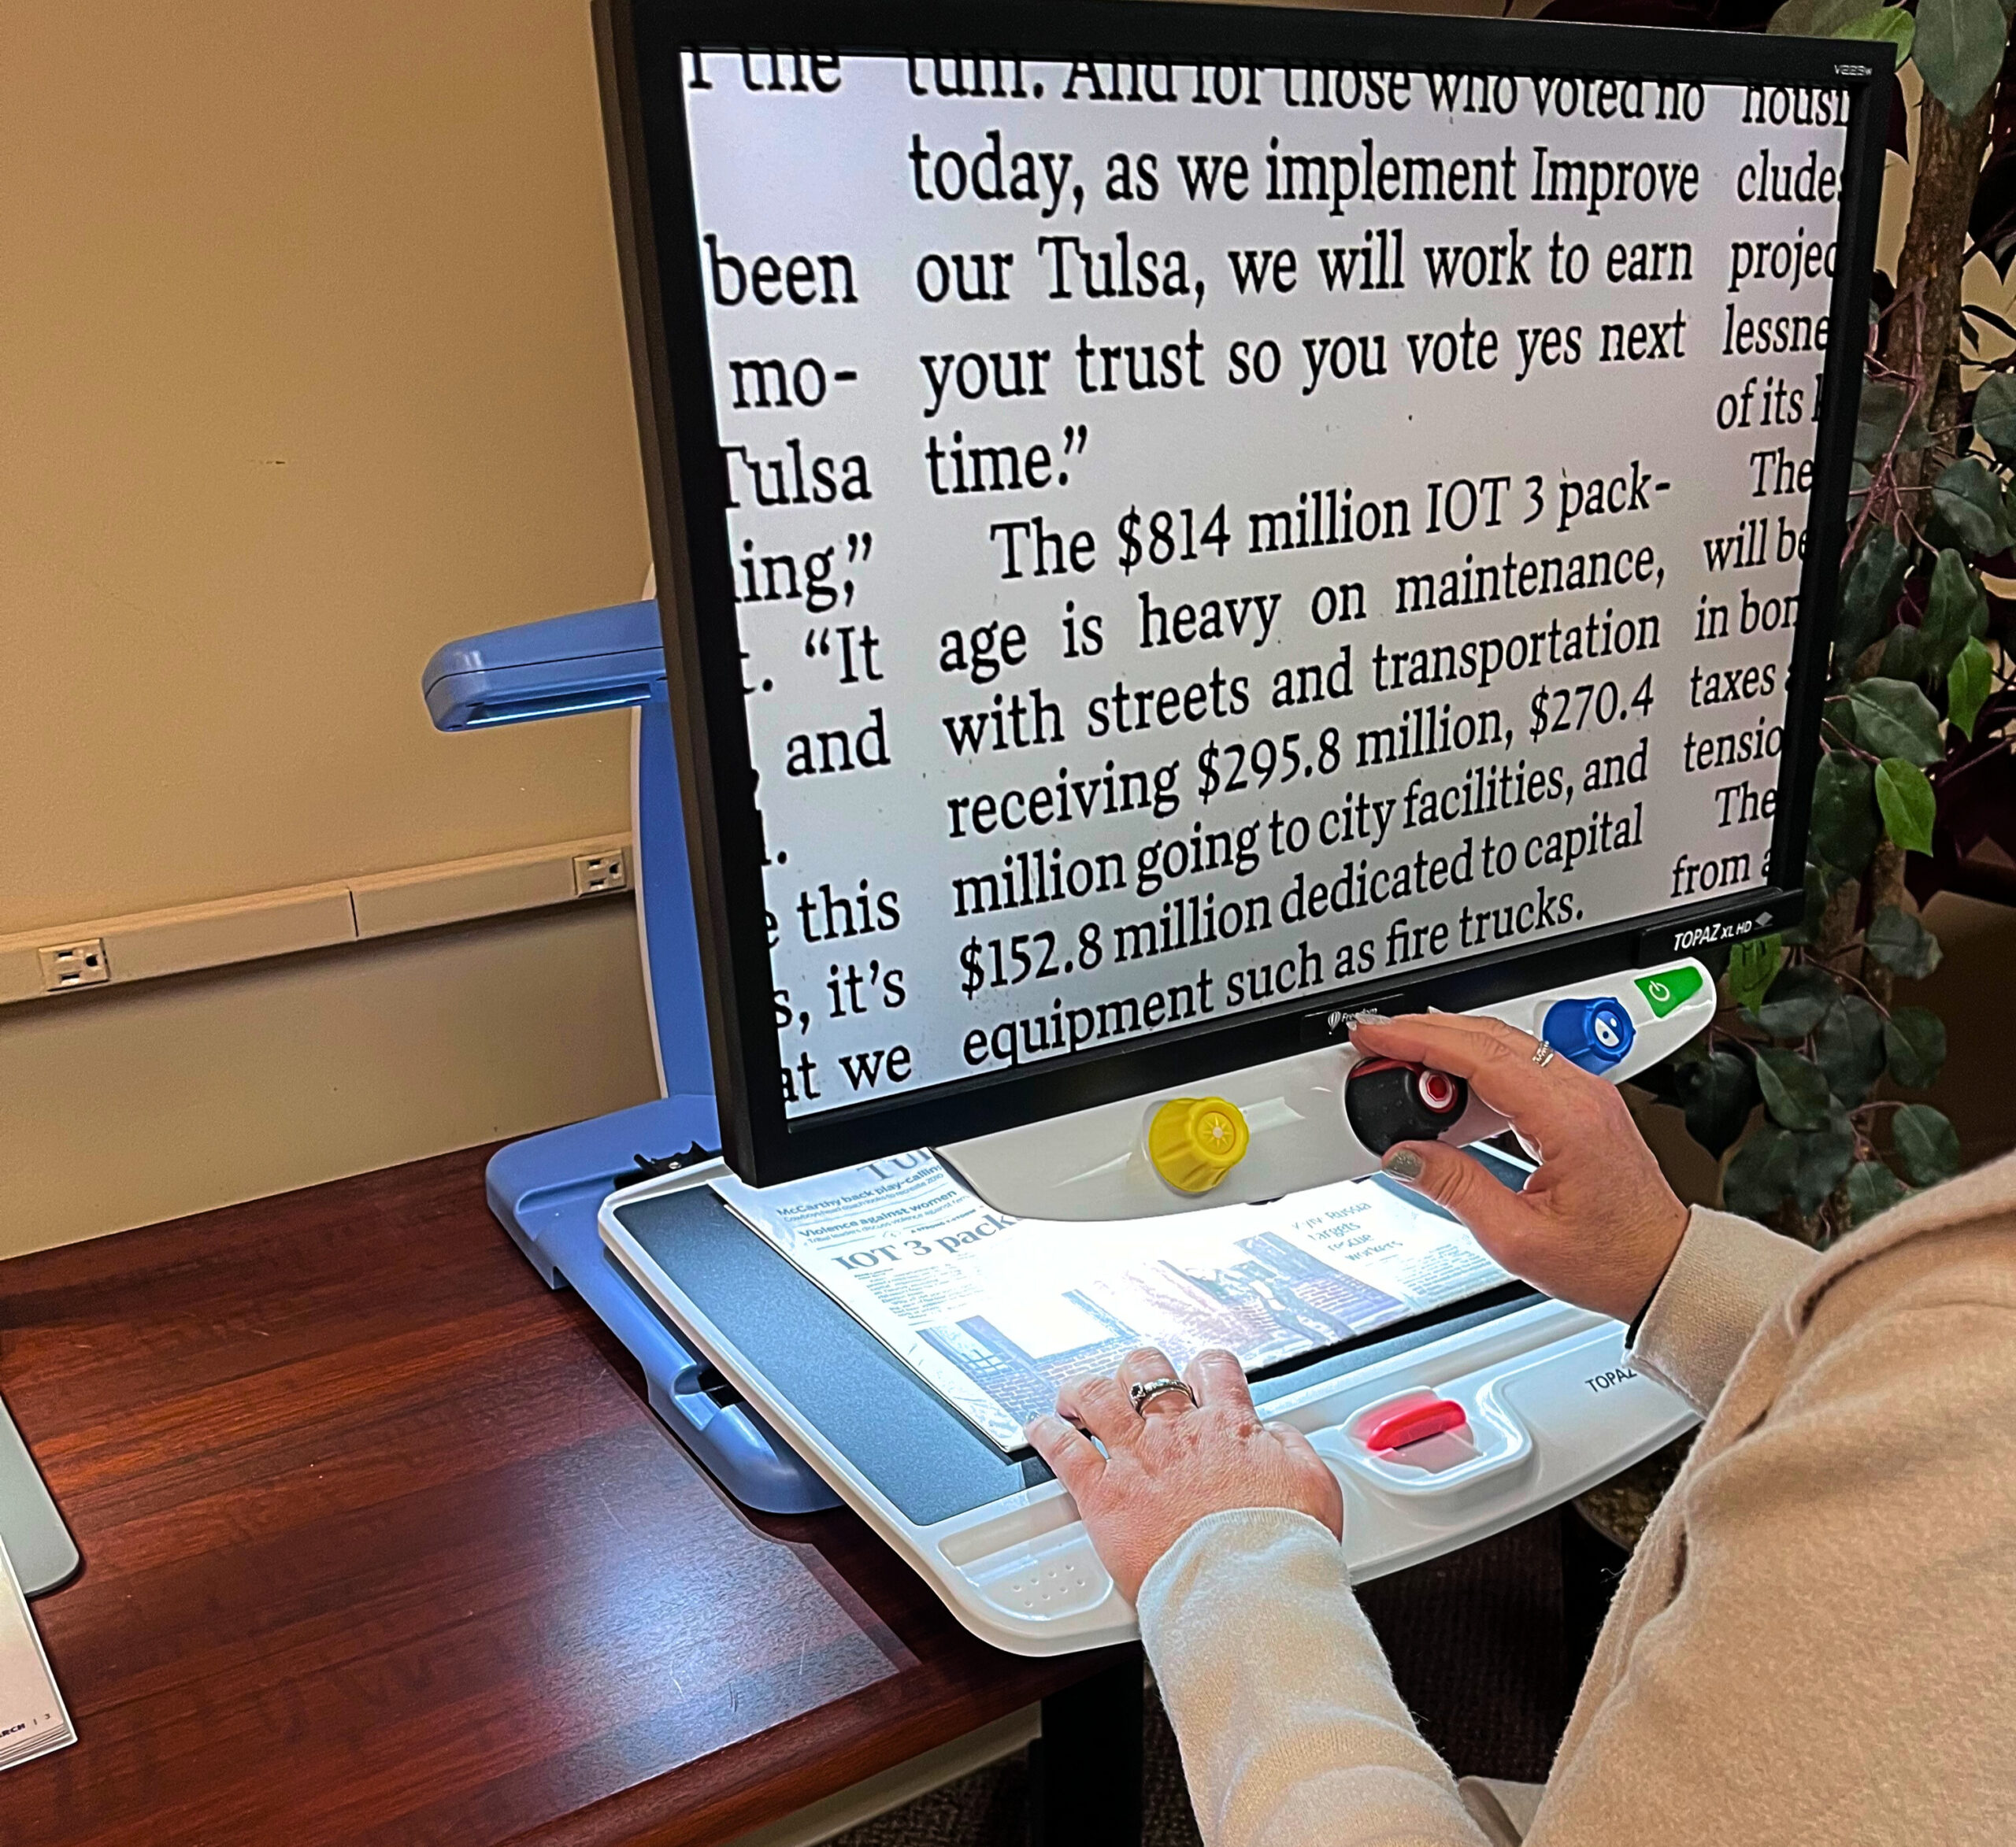 Image of maria from NanoPac reading the newspaper on a Topaz Desktop Video Magnifier in the NanoPac Demonstration Room in Tulsa 